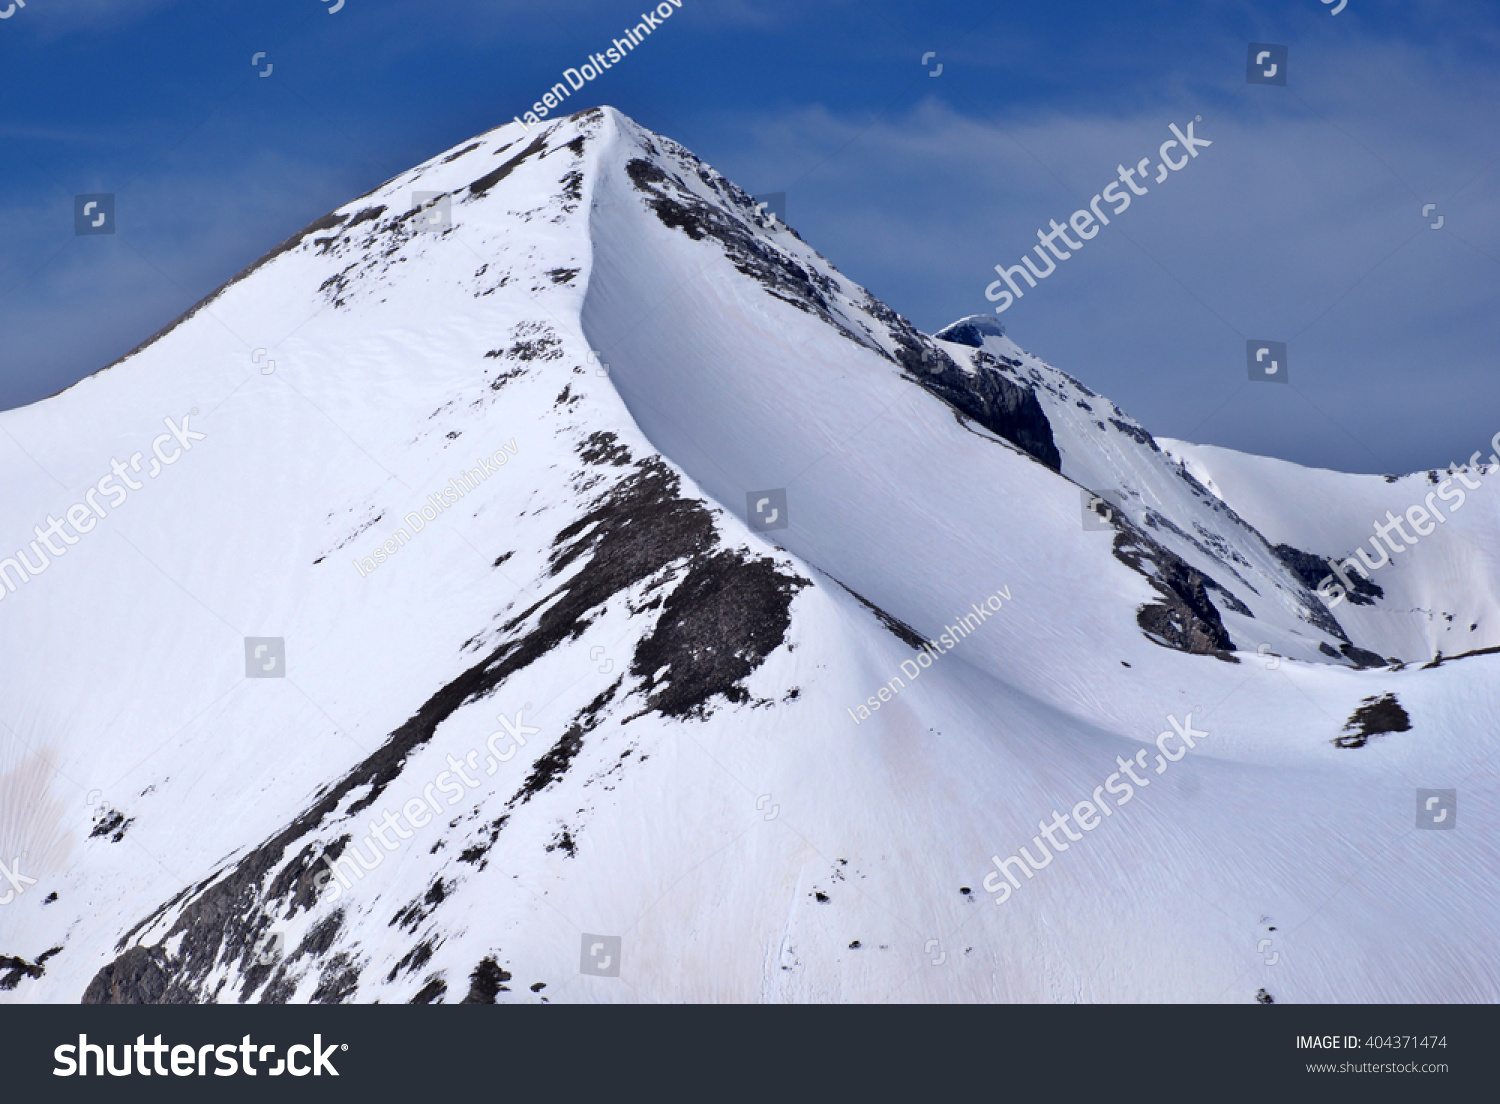 Mountain With Snow Stock Photo 404371474 : Shutterstock